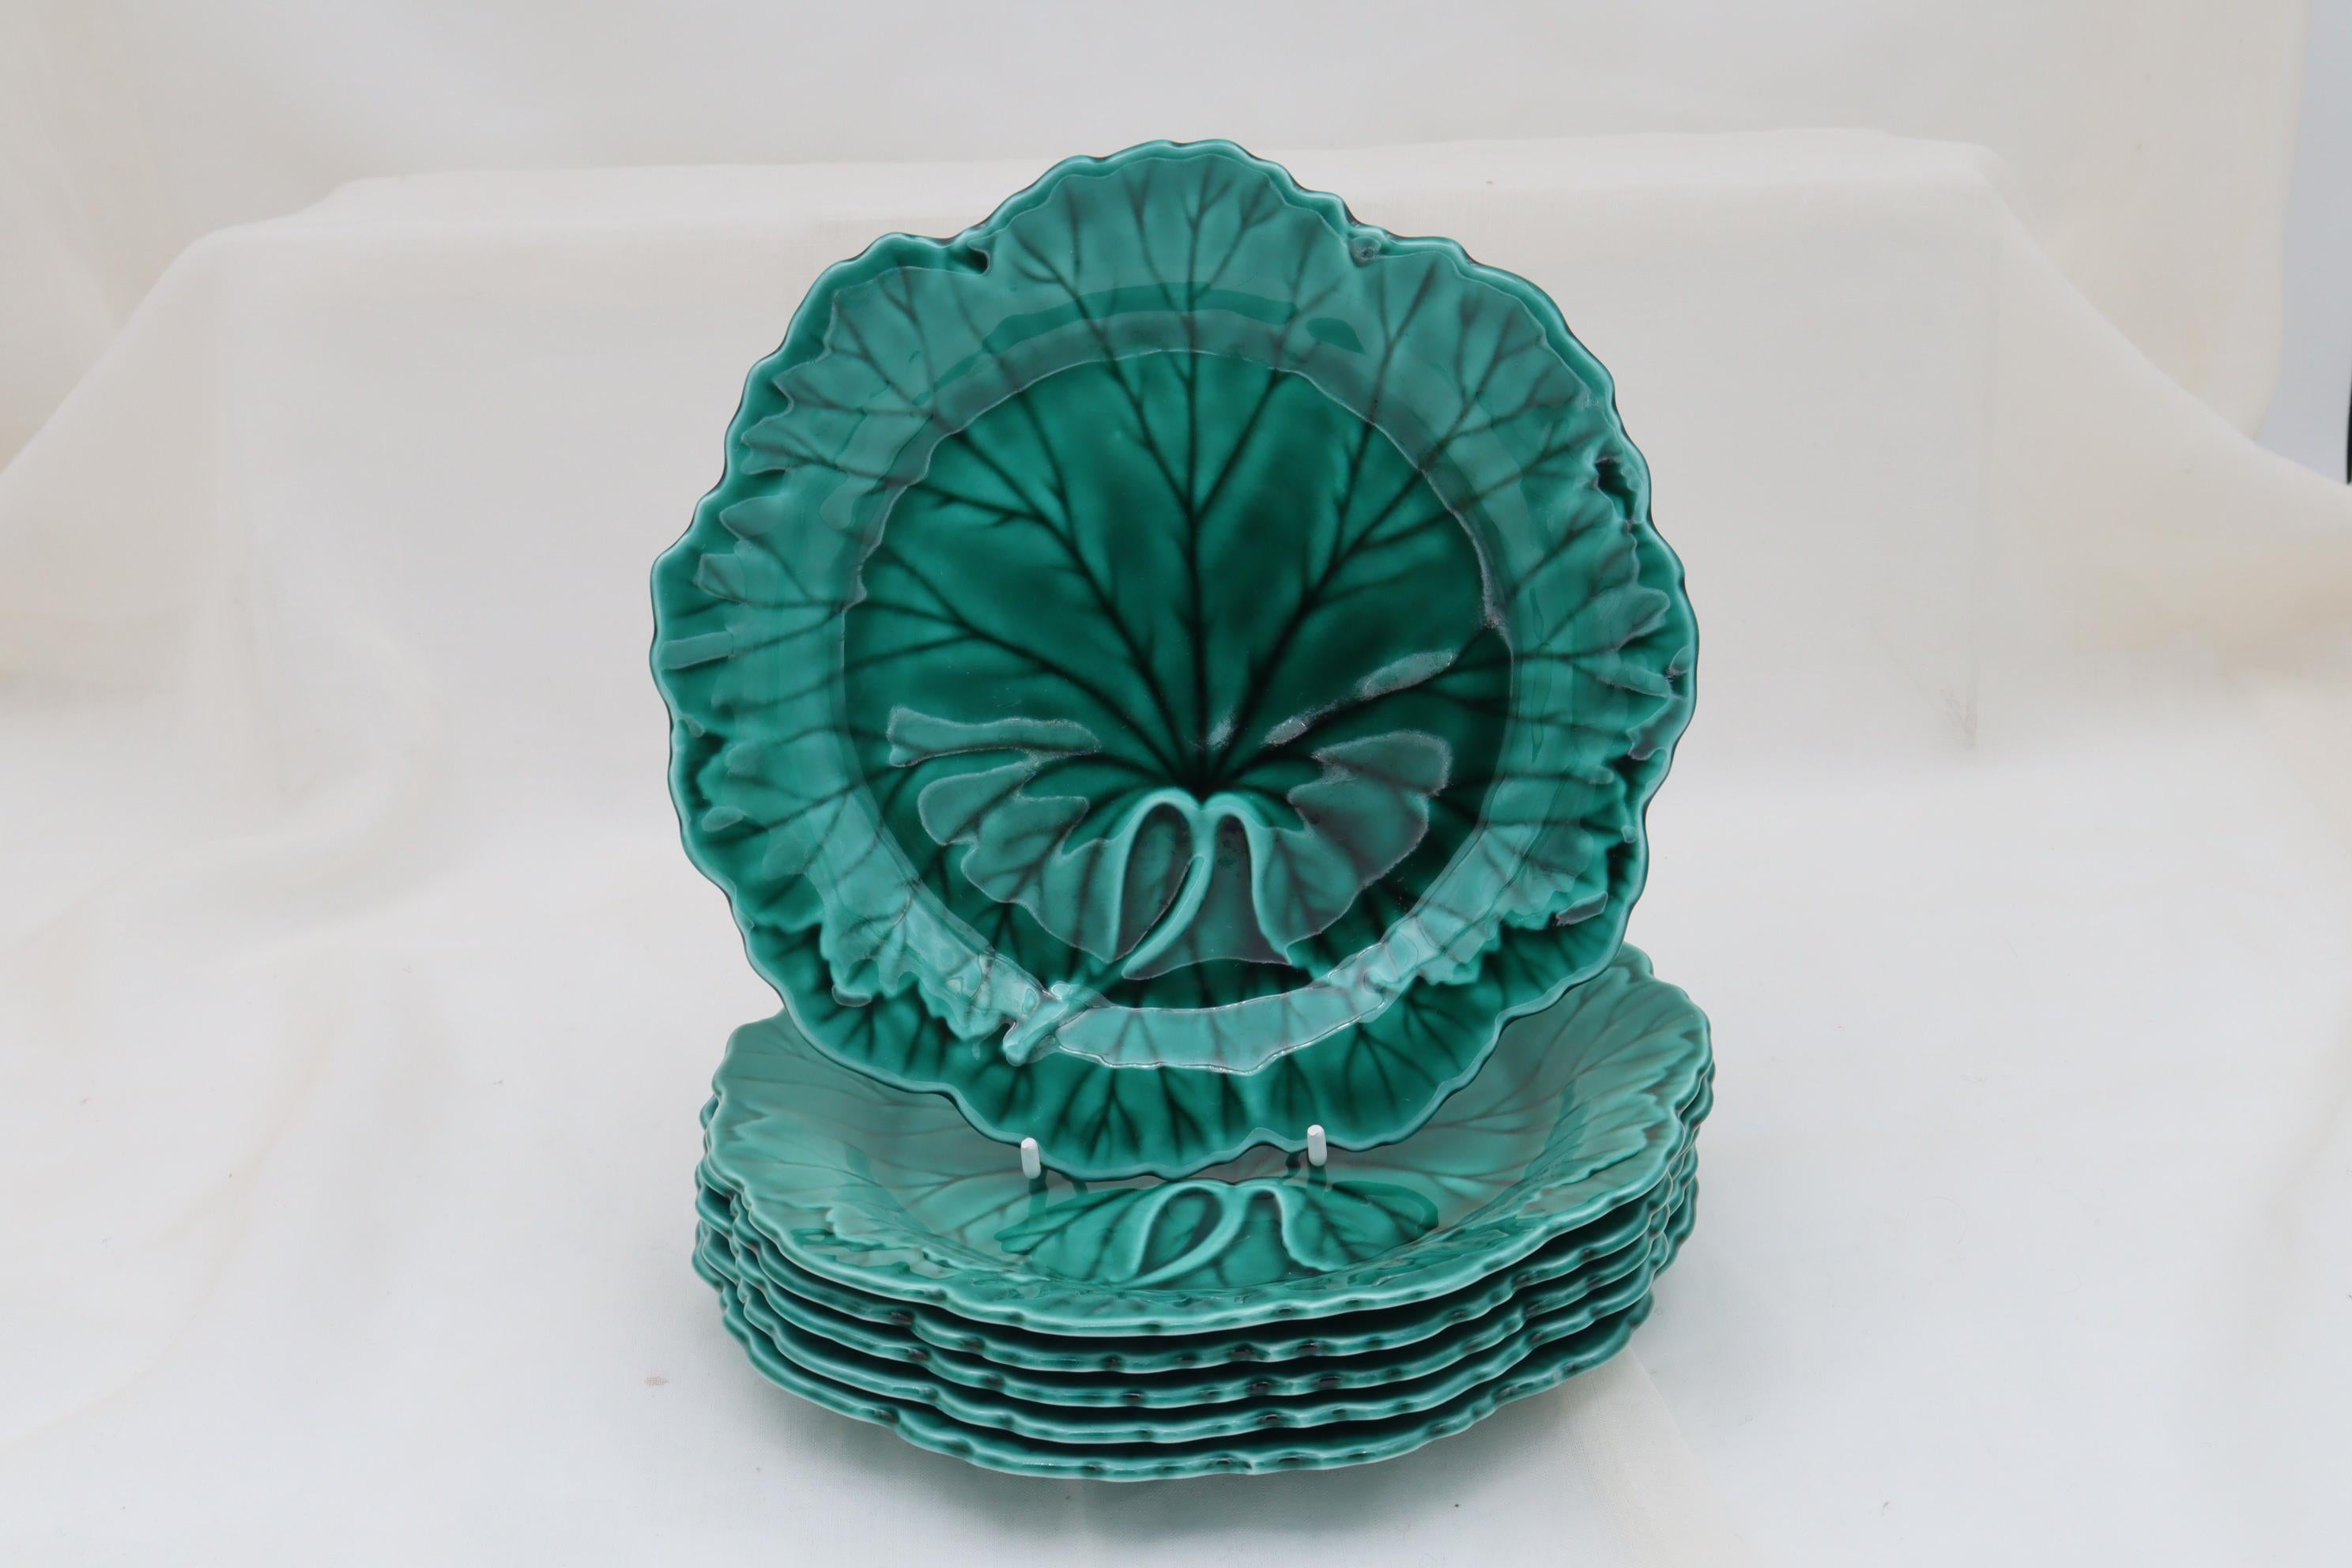 A set of six Wedgwood plates decorated with a moulded pattern of a cabbage leaf, and with a variegated edge, covered with a transparent green majolica glaze. They measure 200 mm (8 inches) in diameter and stand 20 mm (.75 of an inch) high. They are